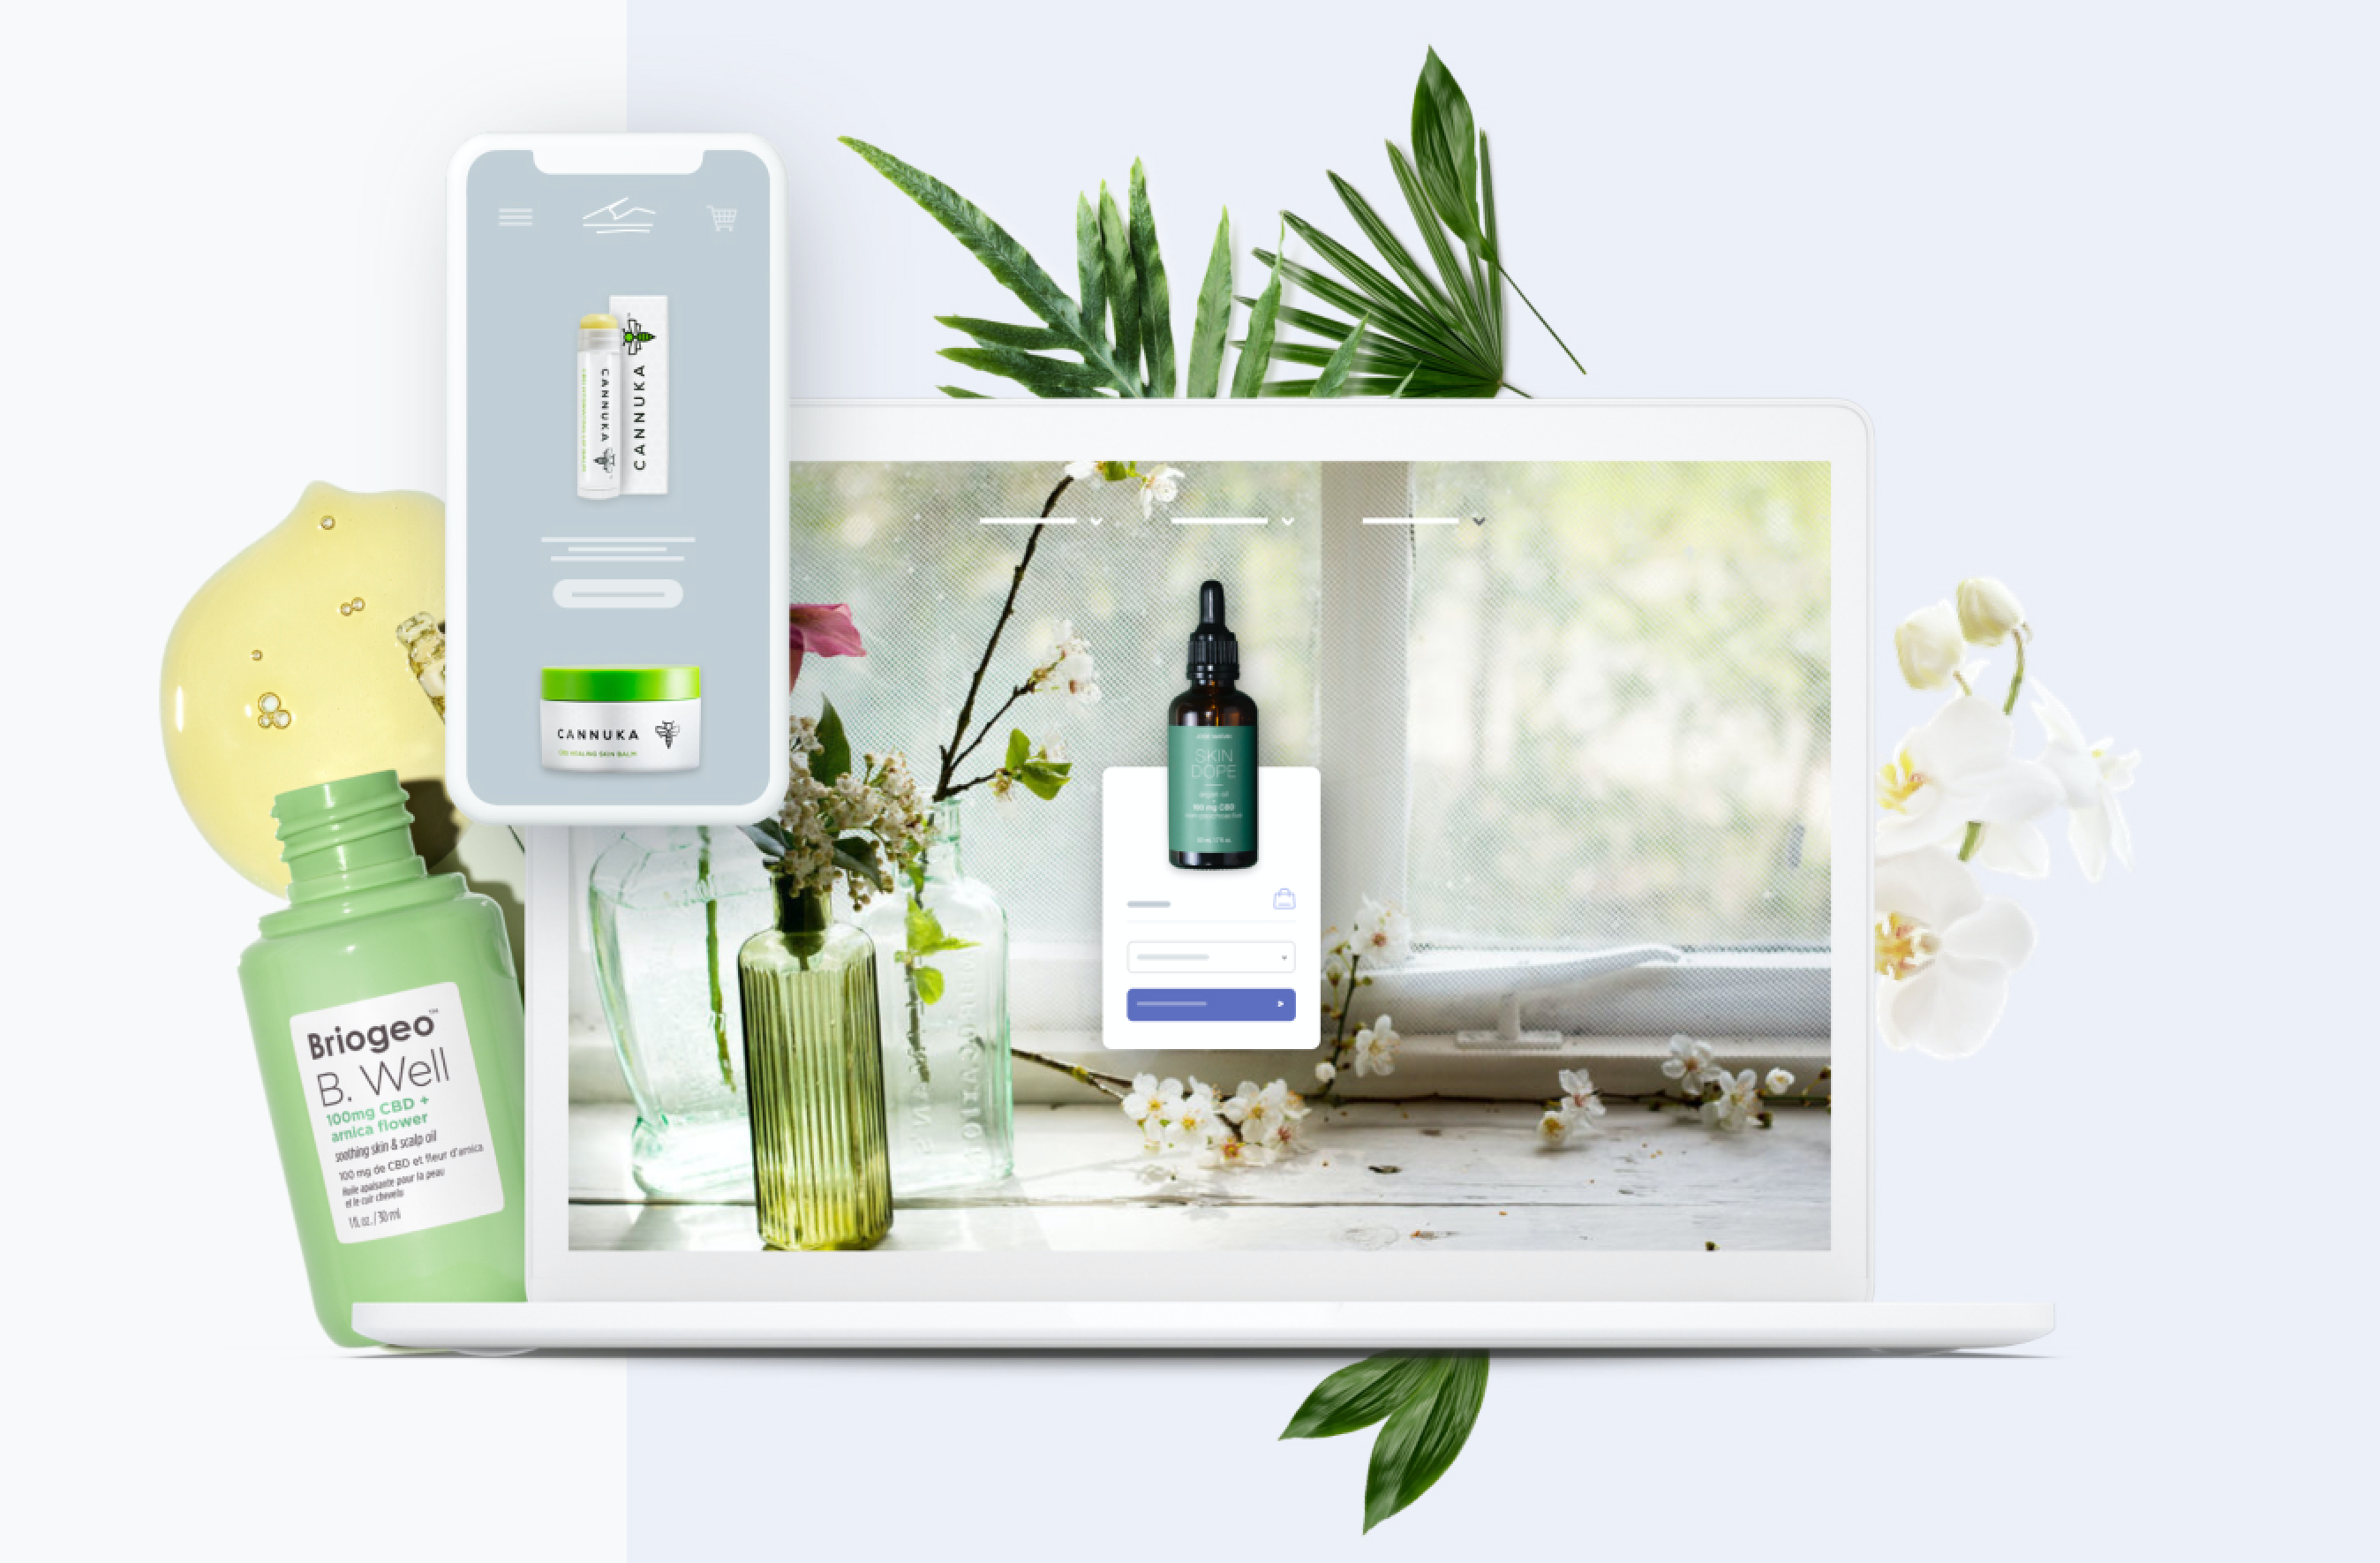 Shopify Launches CBD Business In The US: 'Shopify Didn't Get Into CBD; CBD Got Into Retail'